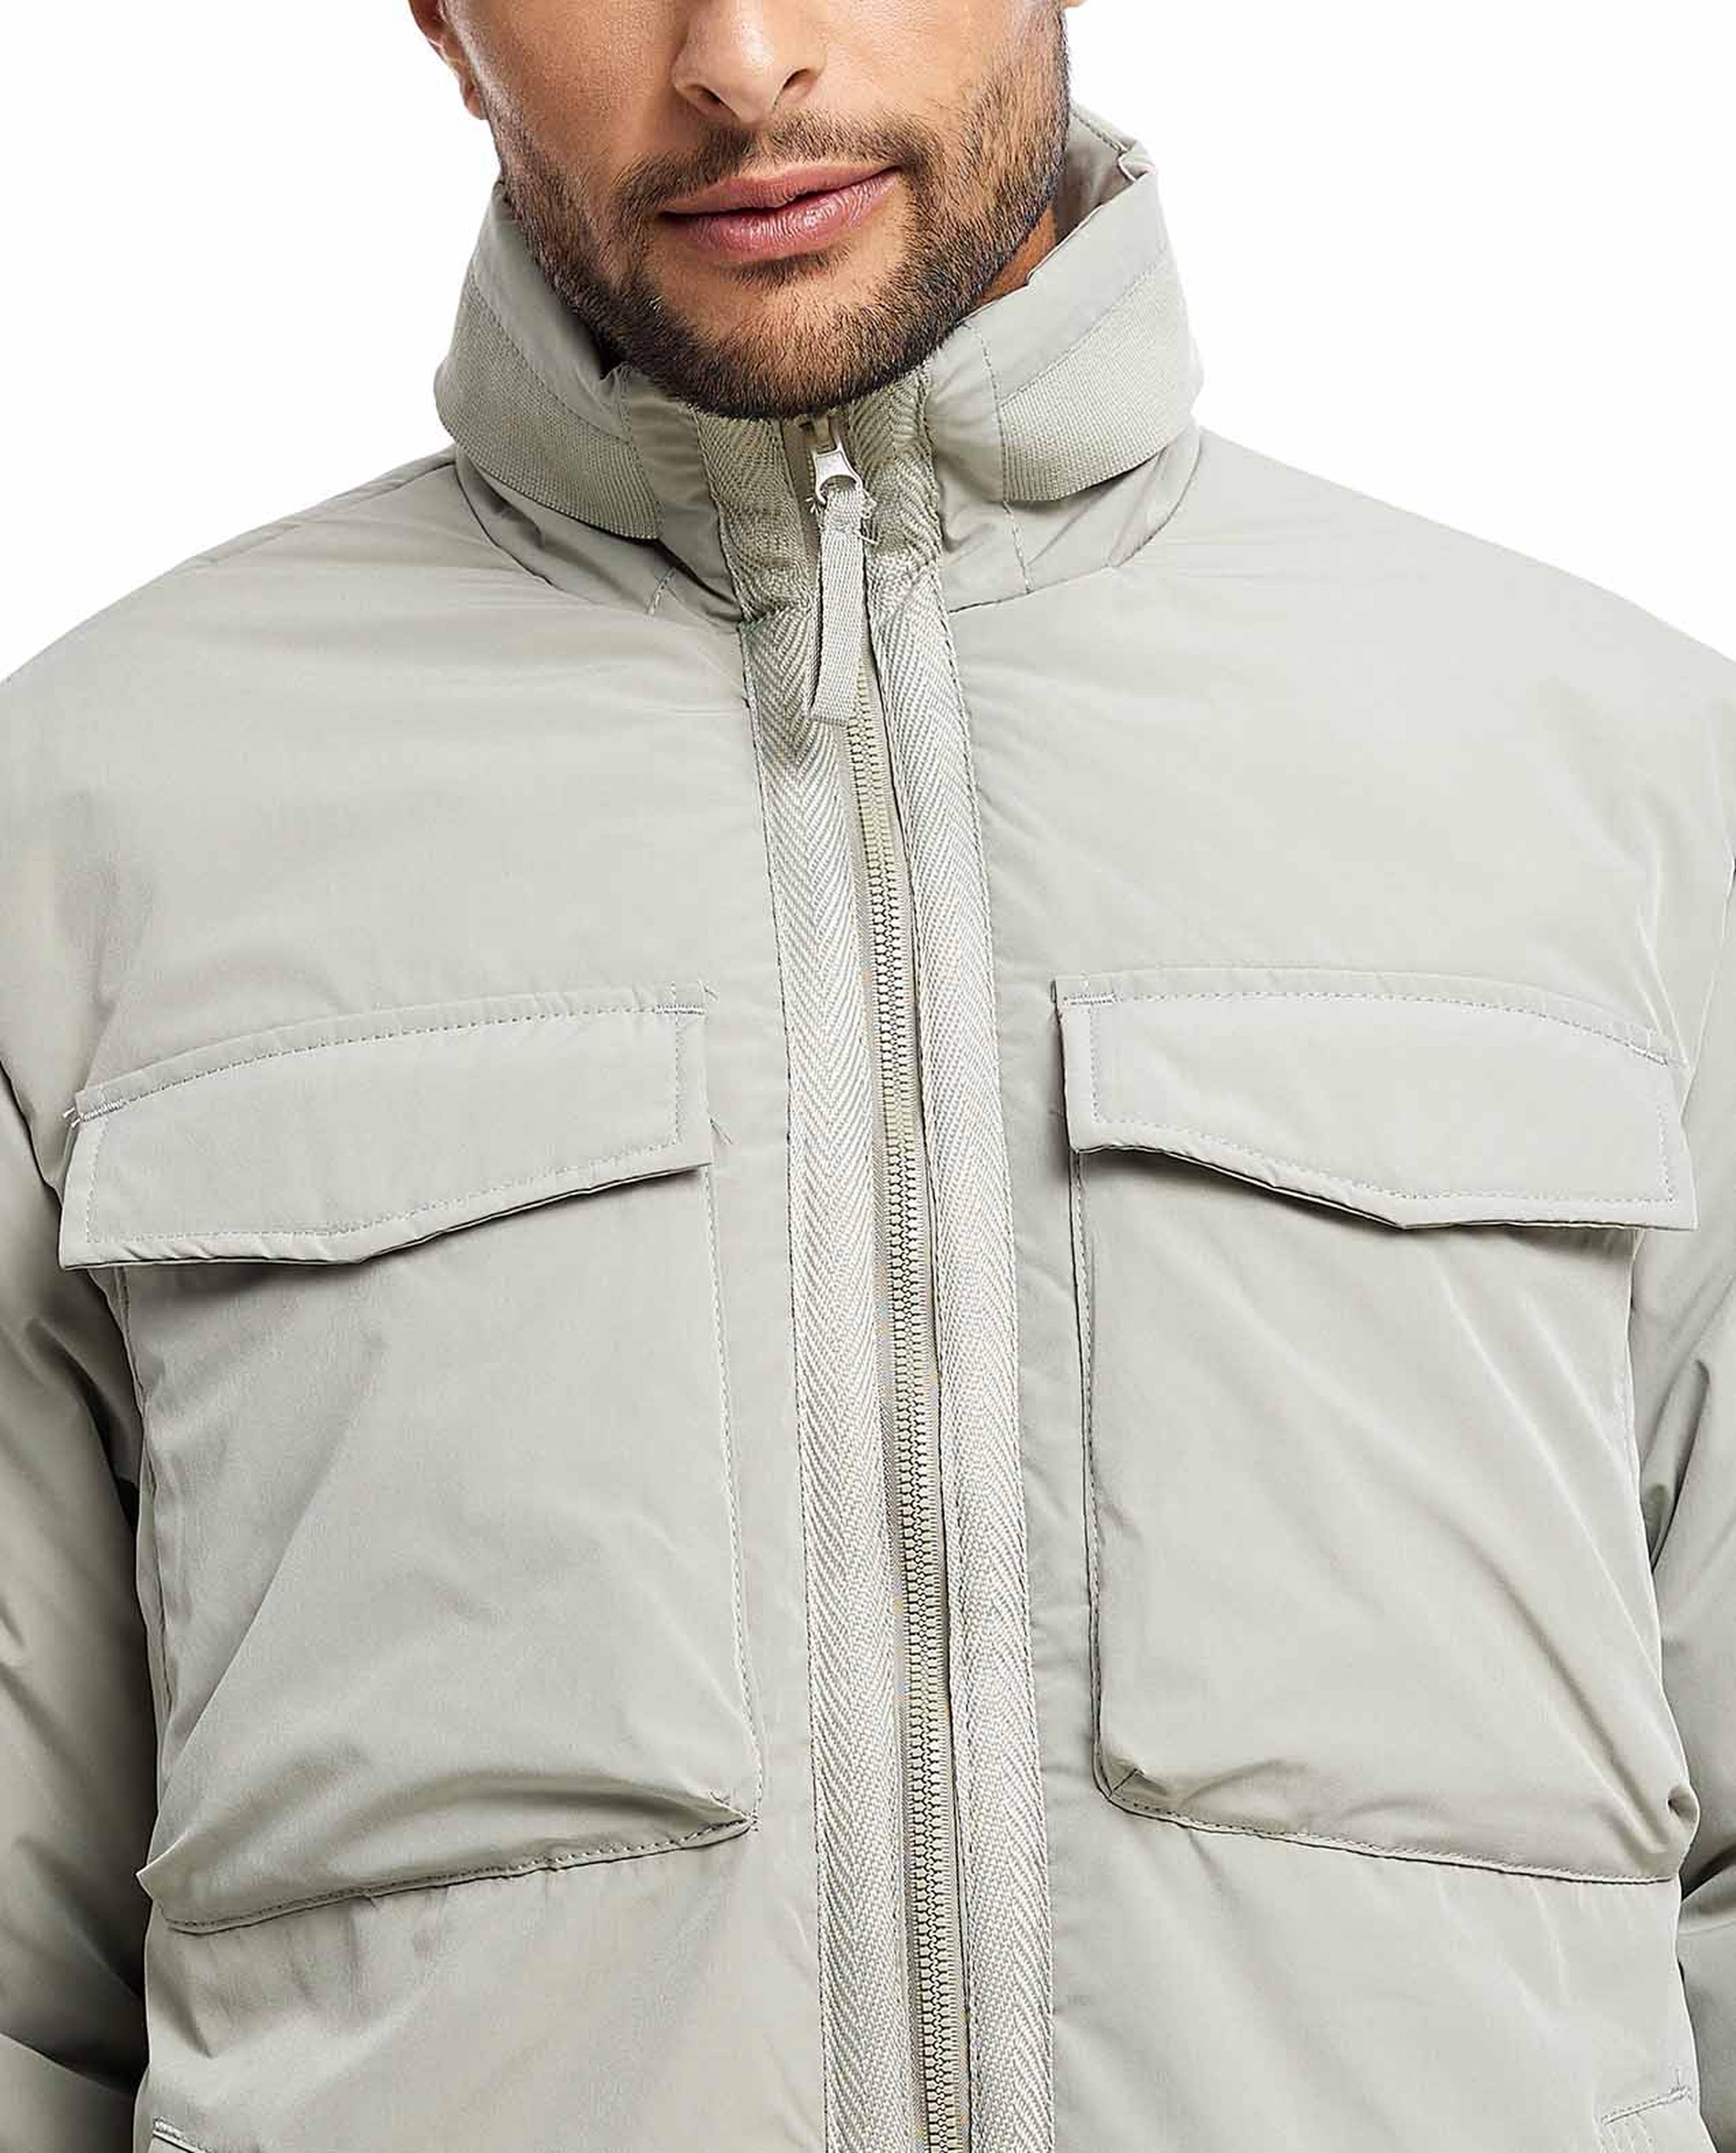 Double Pocket High Neck Jacket with Zipper Closure